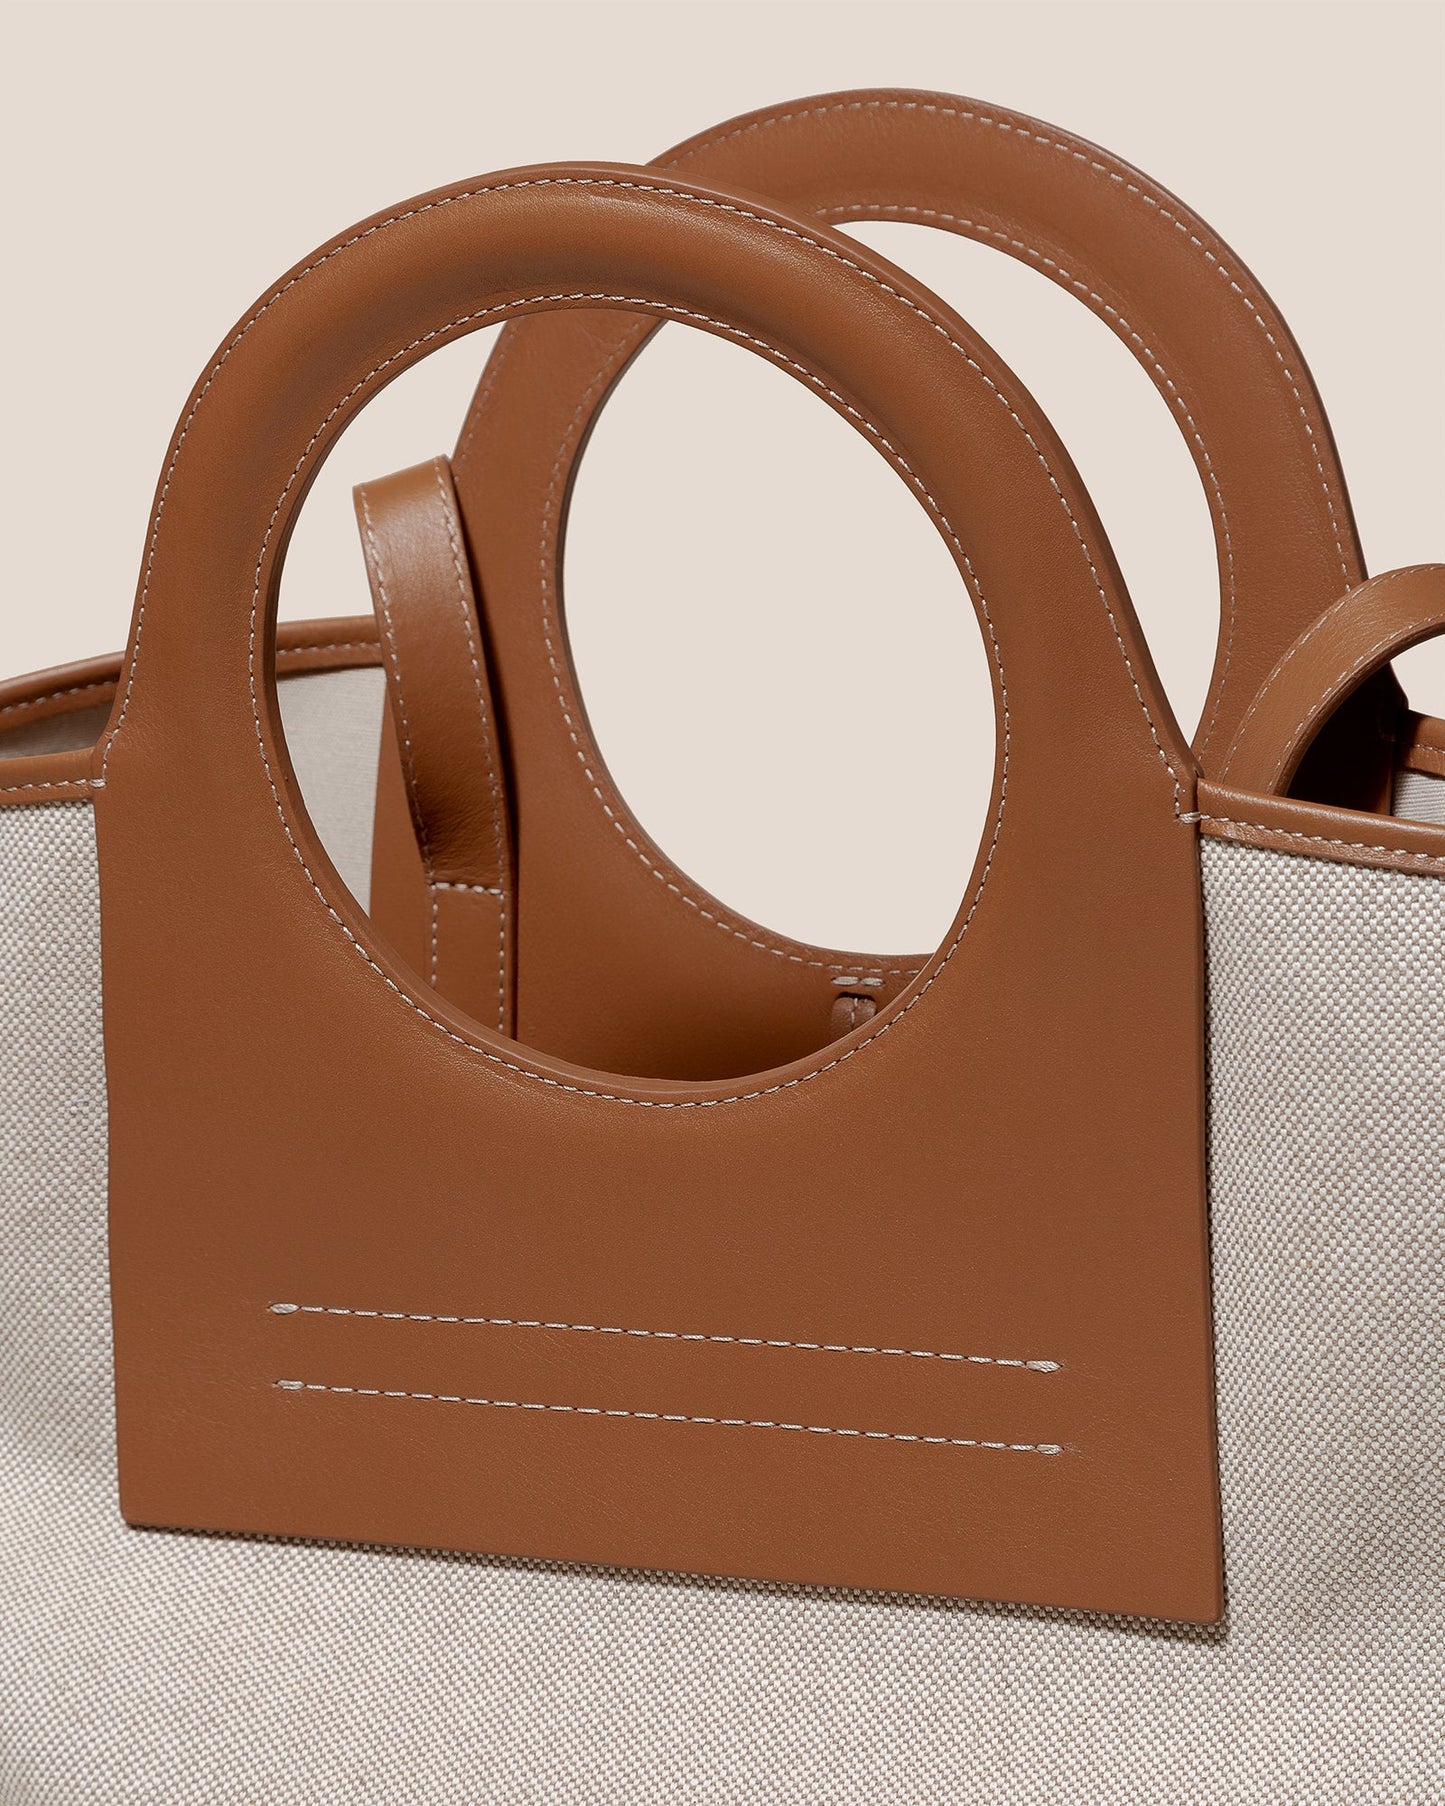 CALA L - Leather-trimmed Canvas Tote Bag